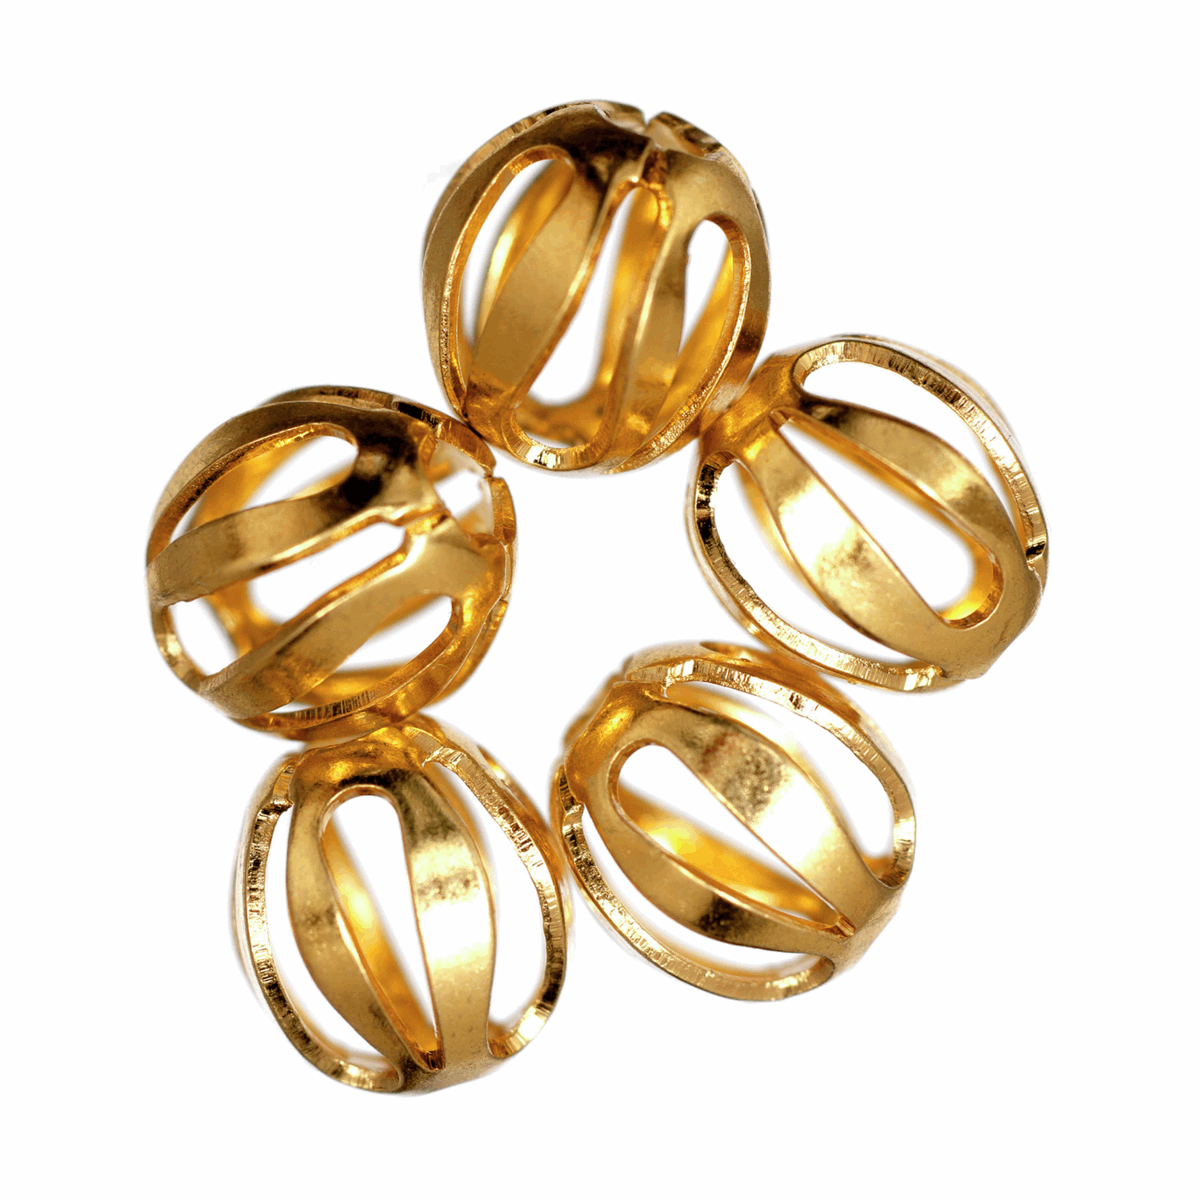 Trimits Oval Filigree Gilt Plated Beads - 7mm (Pack of 5)